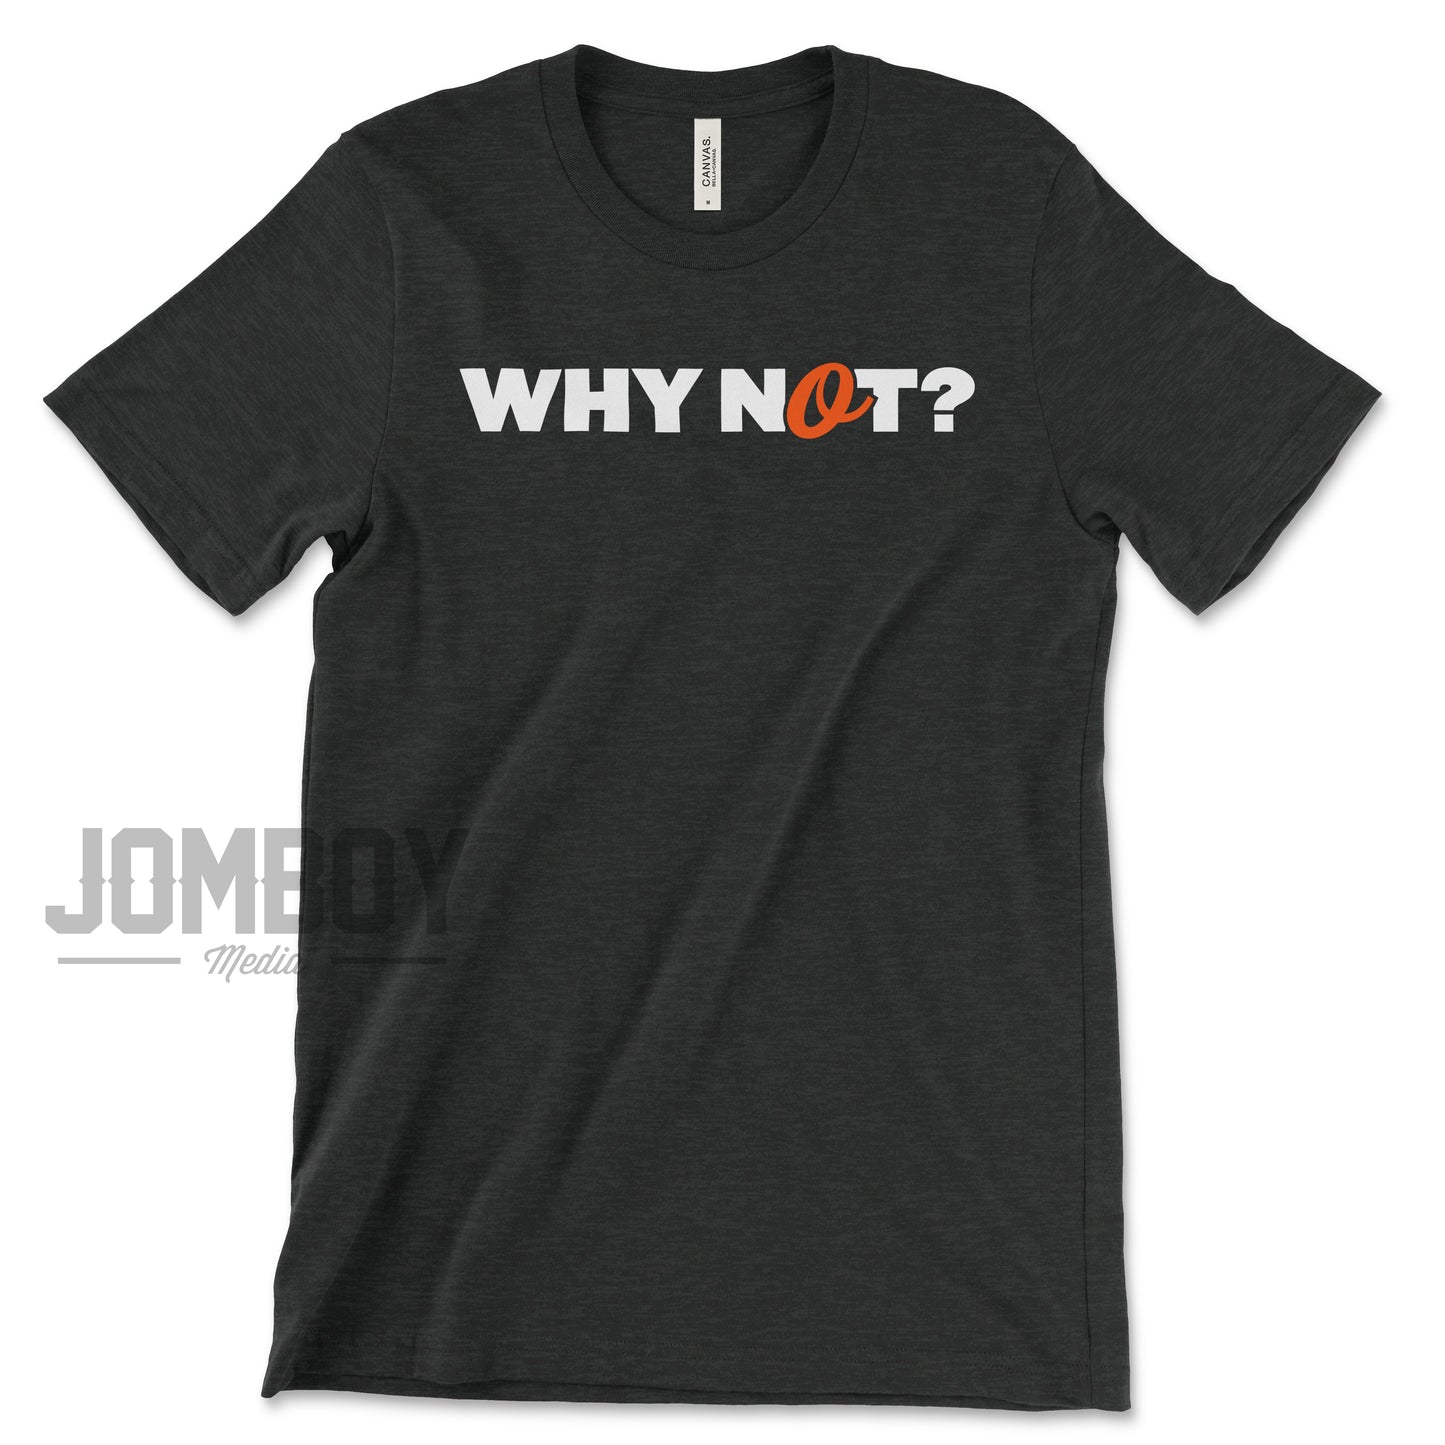 WHY NOT? | T-Shirt